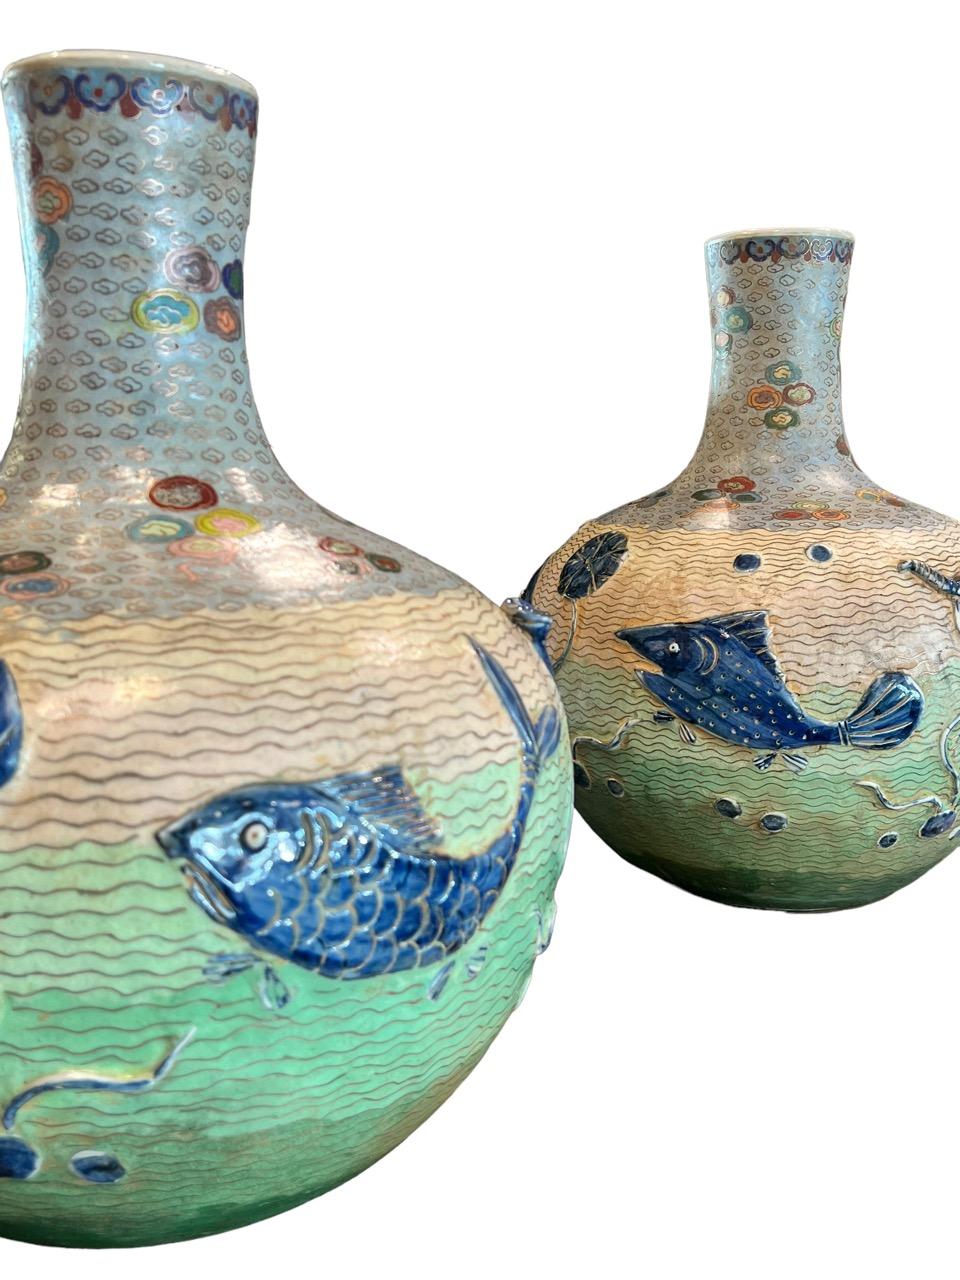 Pair of Early 20th Century '1900s' Chinese Cloisonné Enameled Porcelain Vases For Sale 12